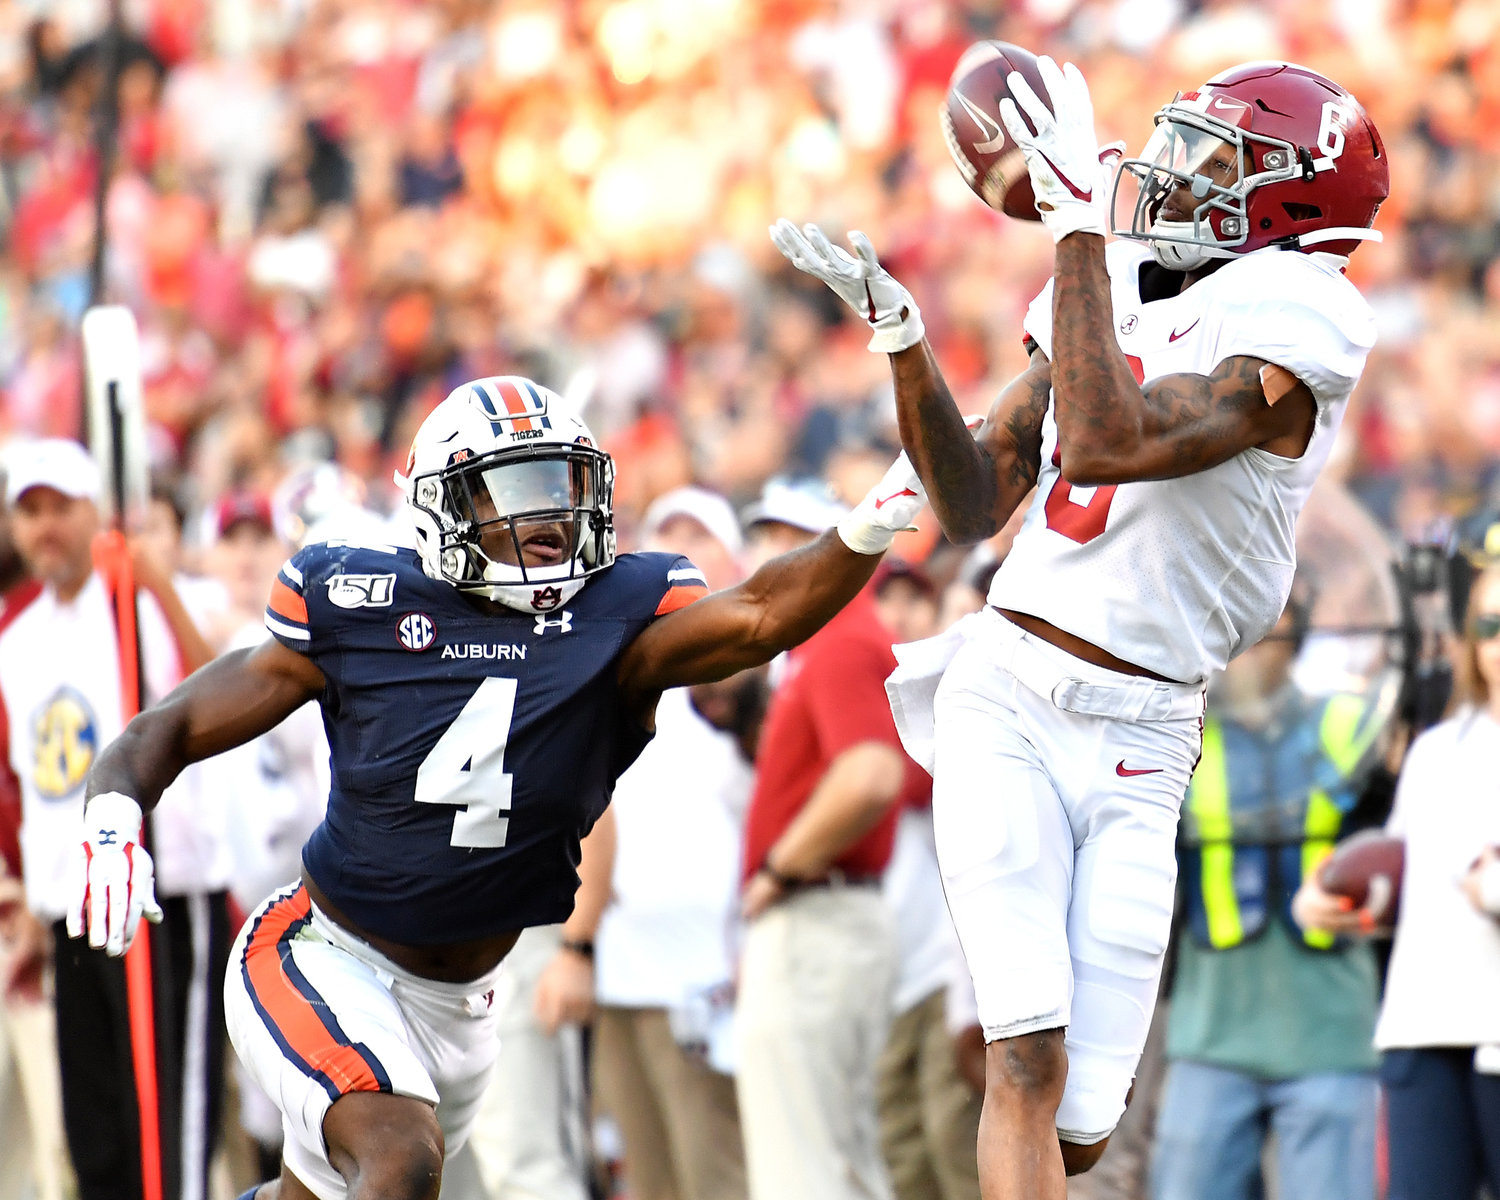 Alabama Crimson Tide wide receiver DeVonta Smith (6) makes a big catch for a first down late in the second quarter of an NCAA football game against the Auburn Tigers Saturday, Nov. 30, 2019, at Jordan-Hare Stadium in Auburn, Ala.